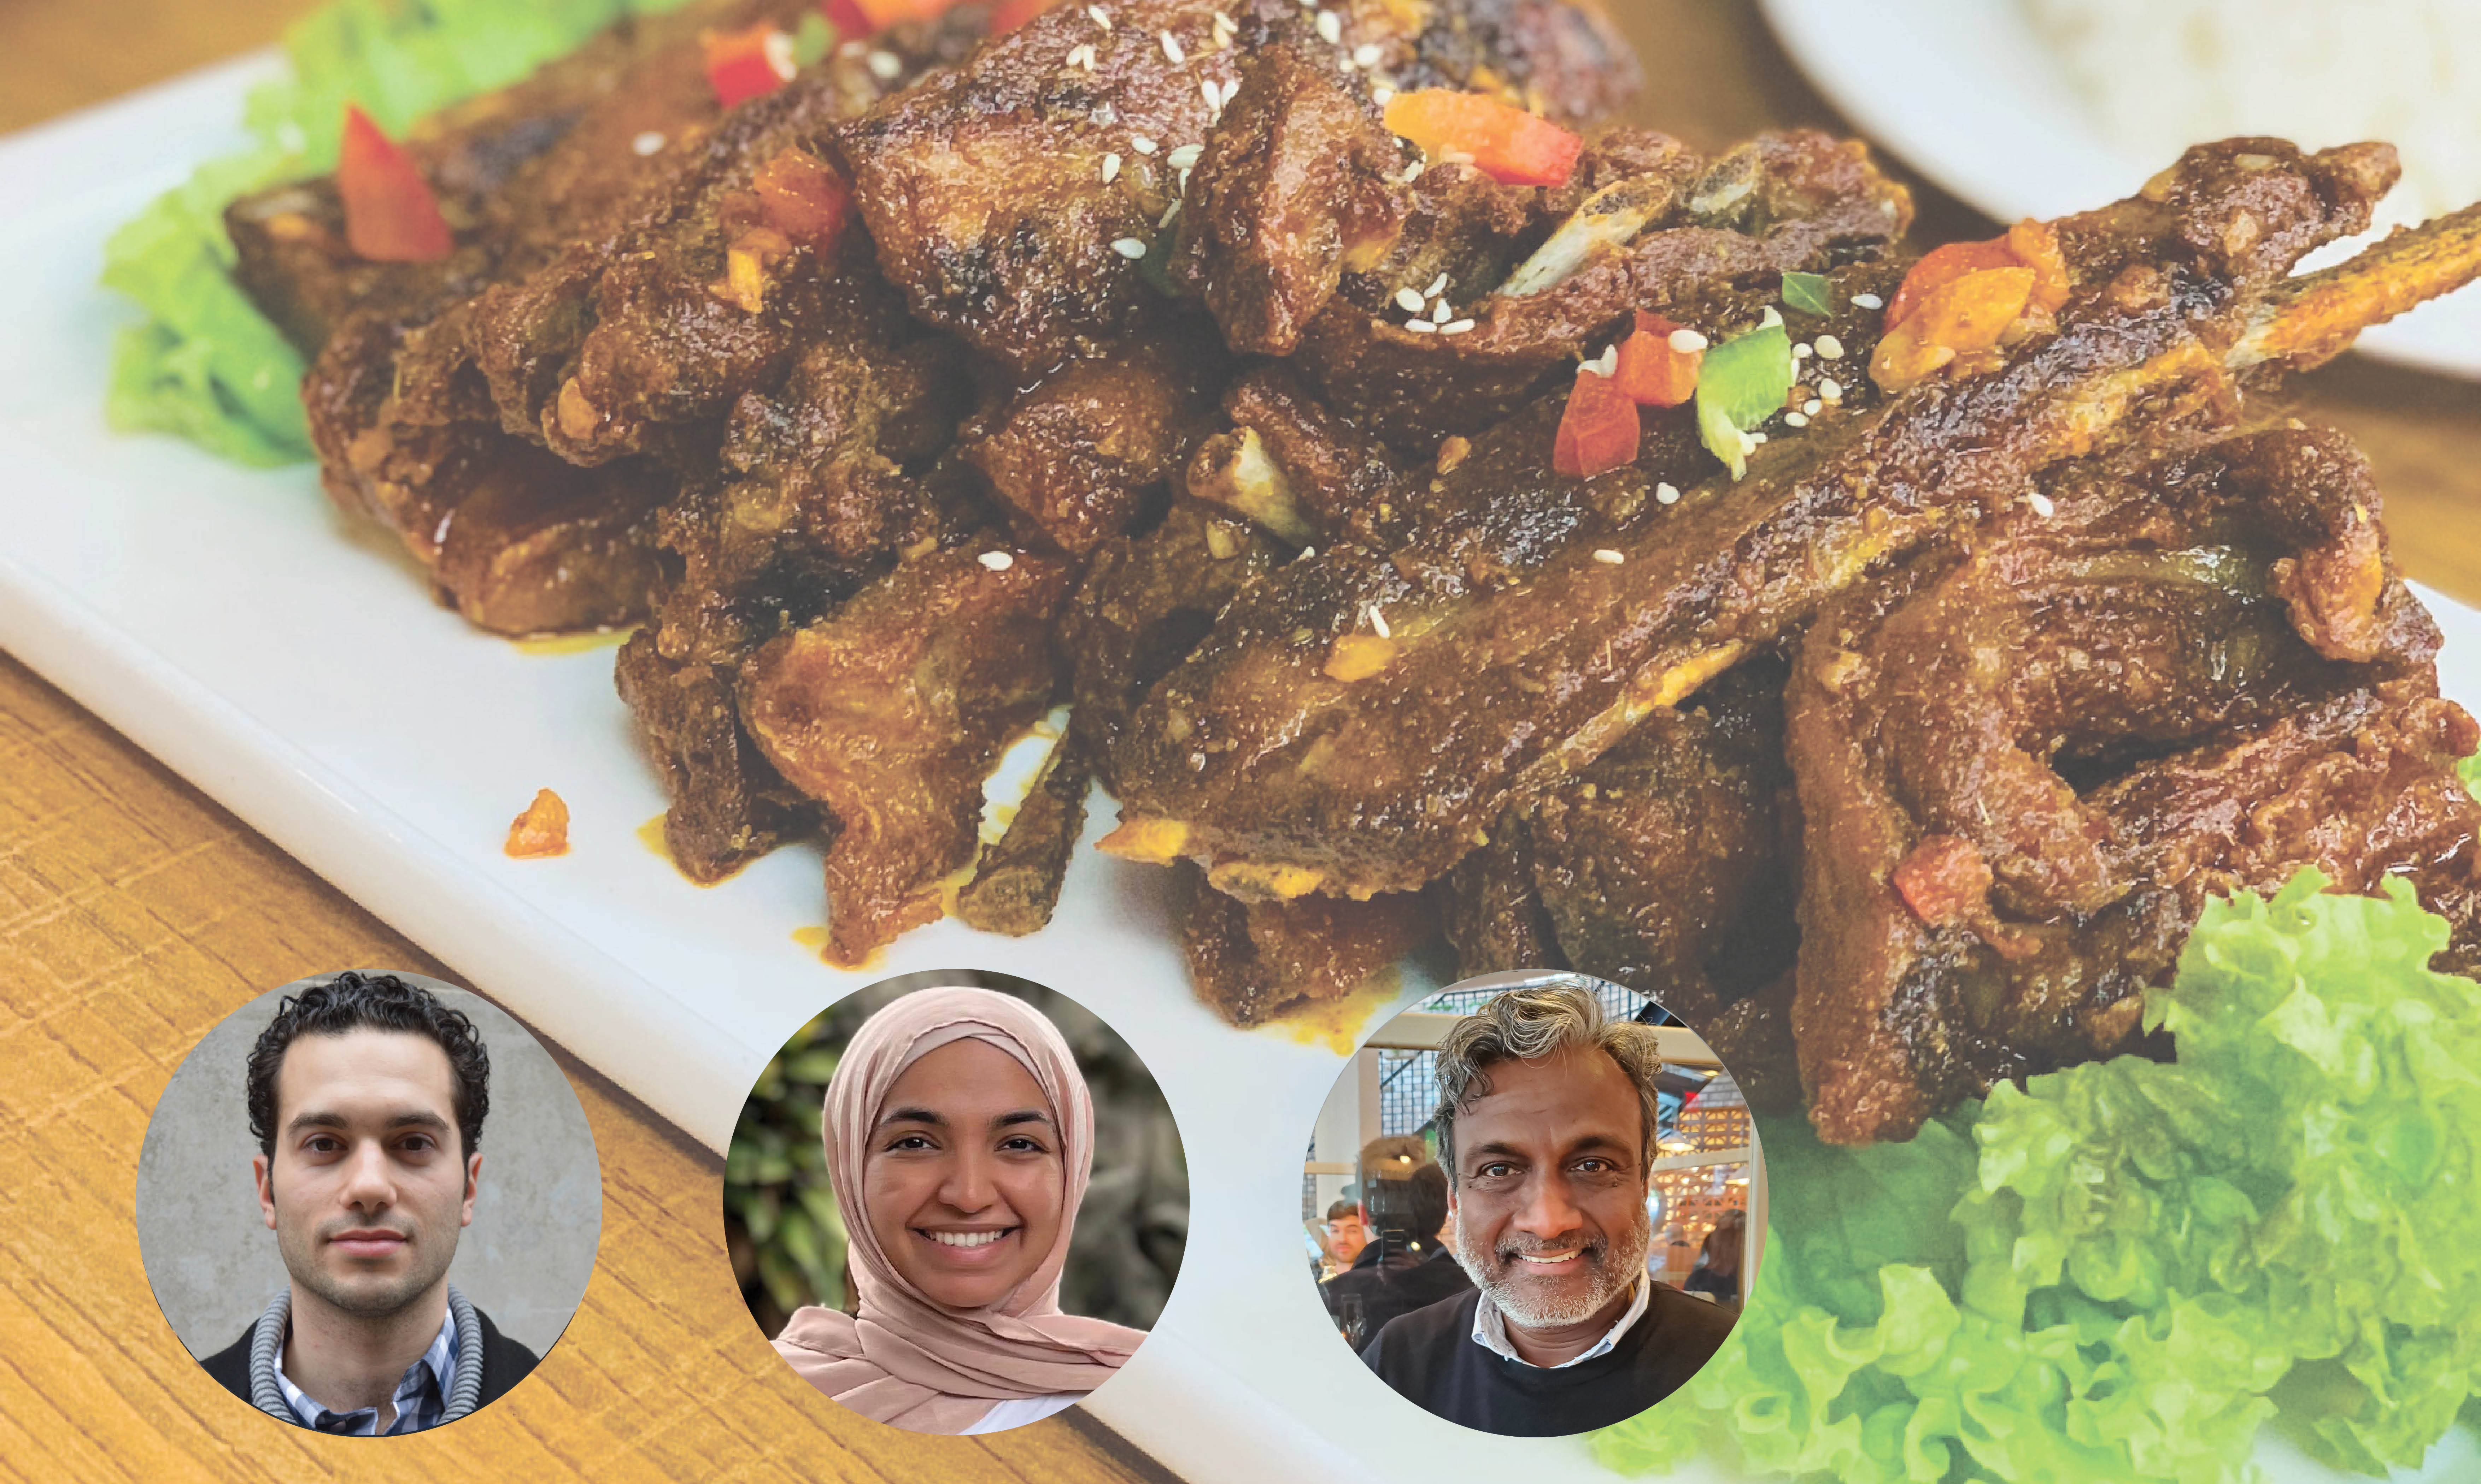 A plate of cooked halal meat on top of lettuce on the sides. The meat is sprinkled with chopped chili peppers and sesame seeds. On the bottom, a row of 3 headshots from left to right: Mohamed Attia, Sameen Choudhry, and Krishnendu Ray.